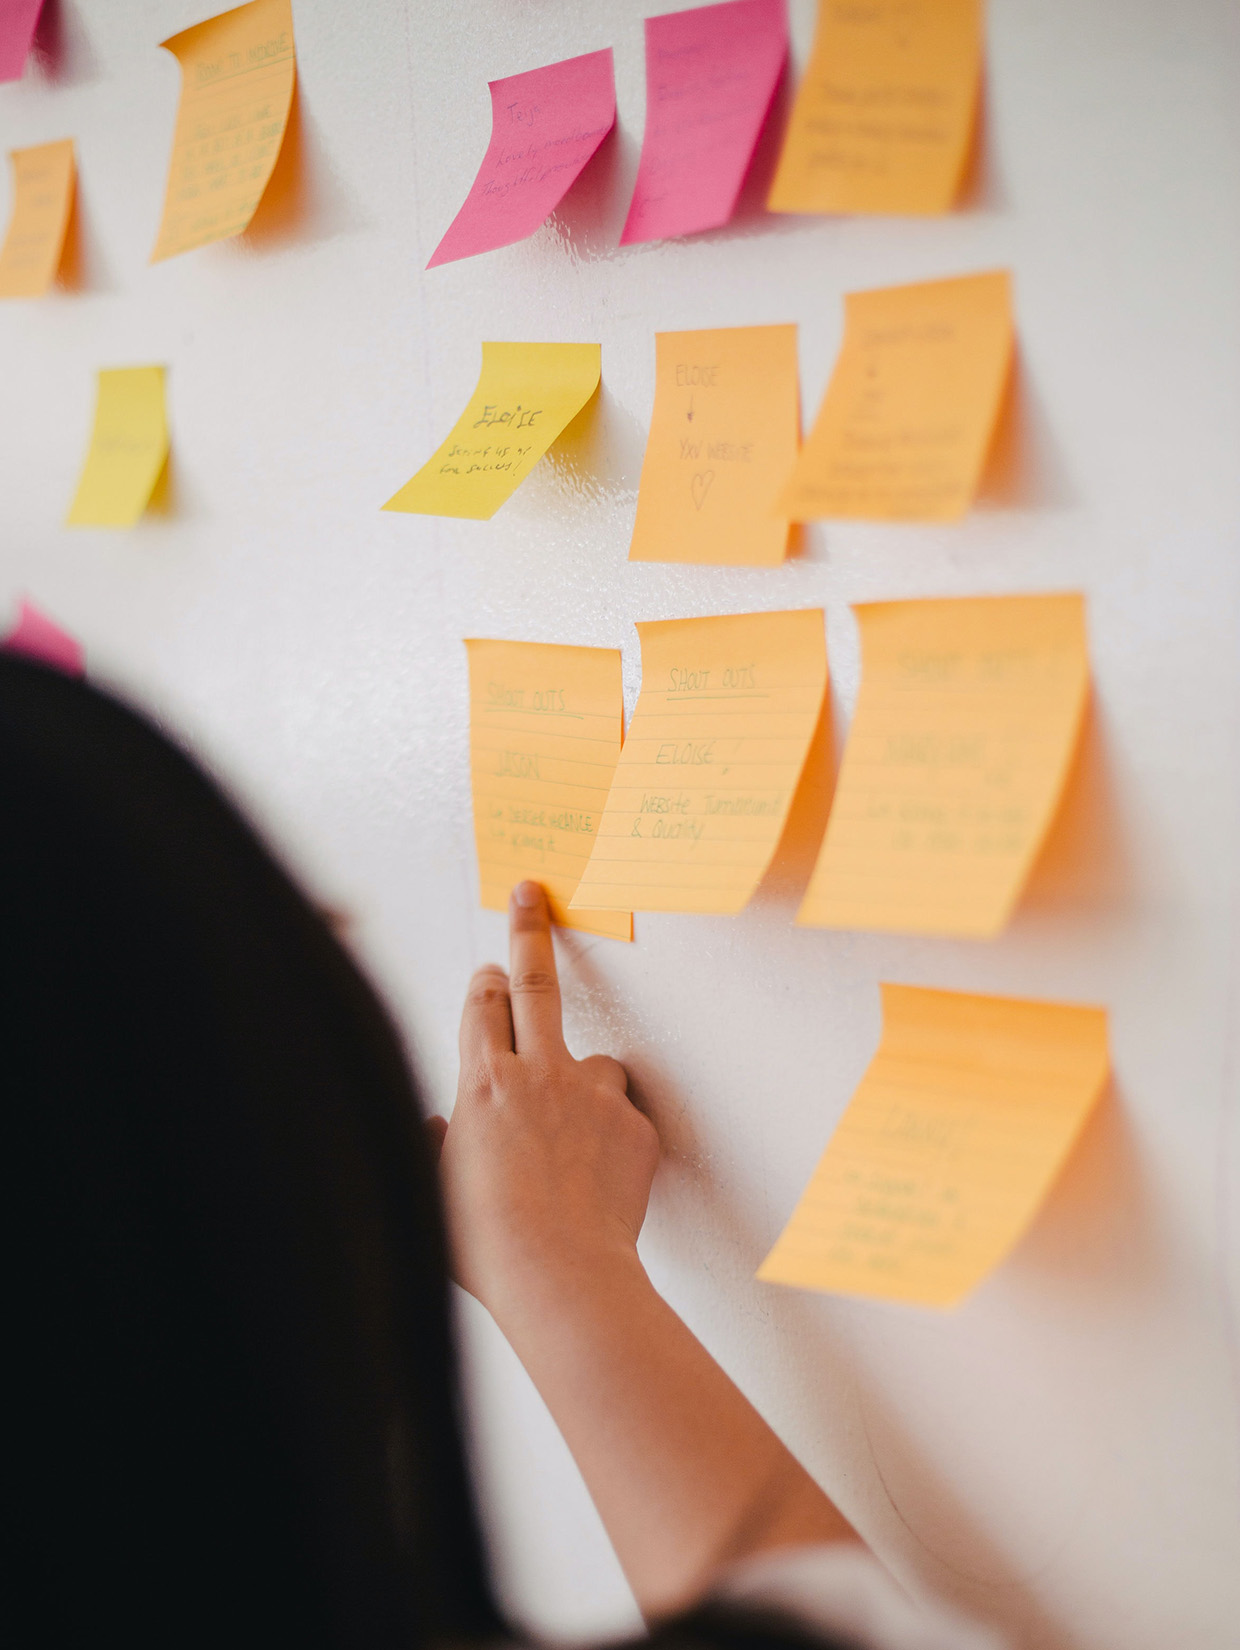 VUI.agency – Asistant persona design – designing charismatic assistant personas – post-its on a wall with finger pointing on them